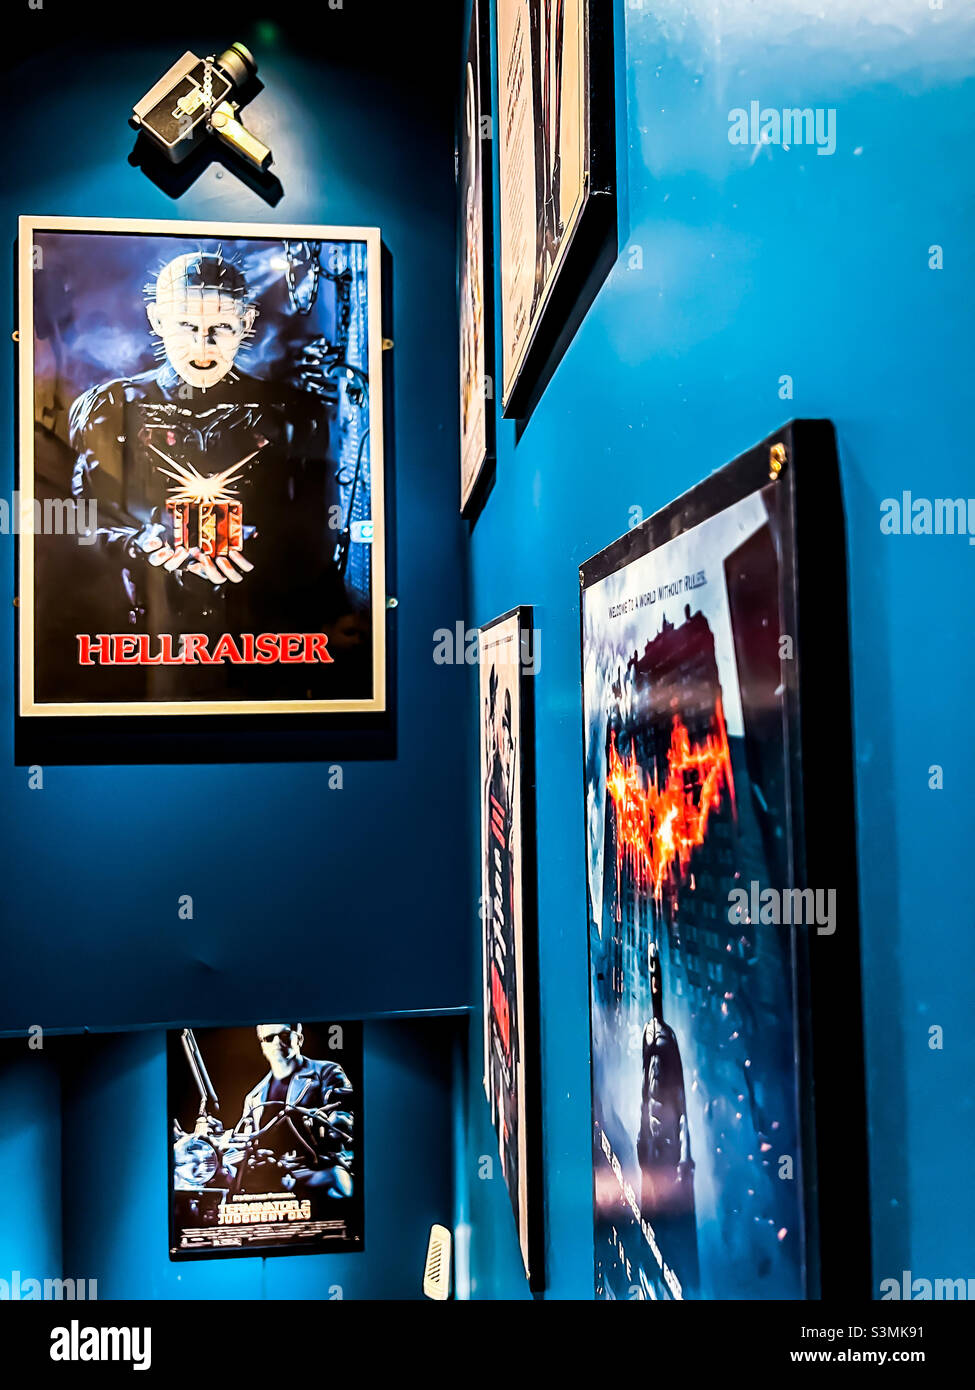 Grindhouse bar in Leeds movie posters Stock Photo